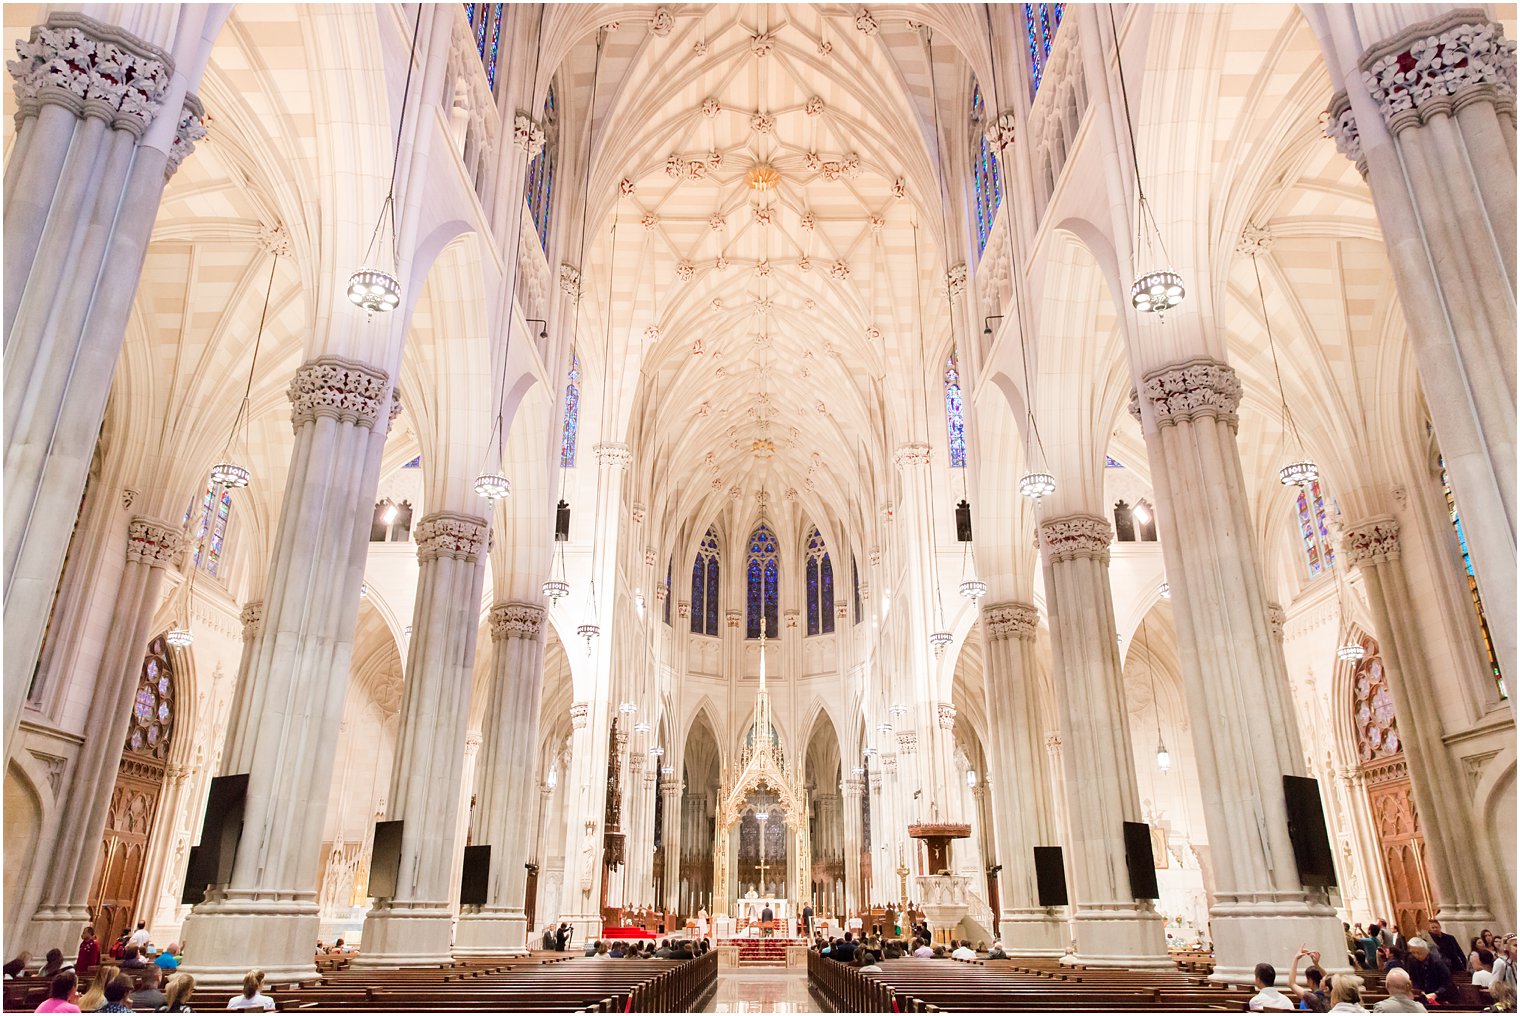 Wedding ceremony at St. Patrick's Cathedral - NYC